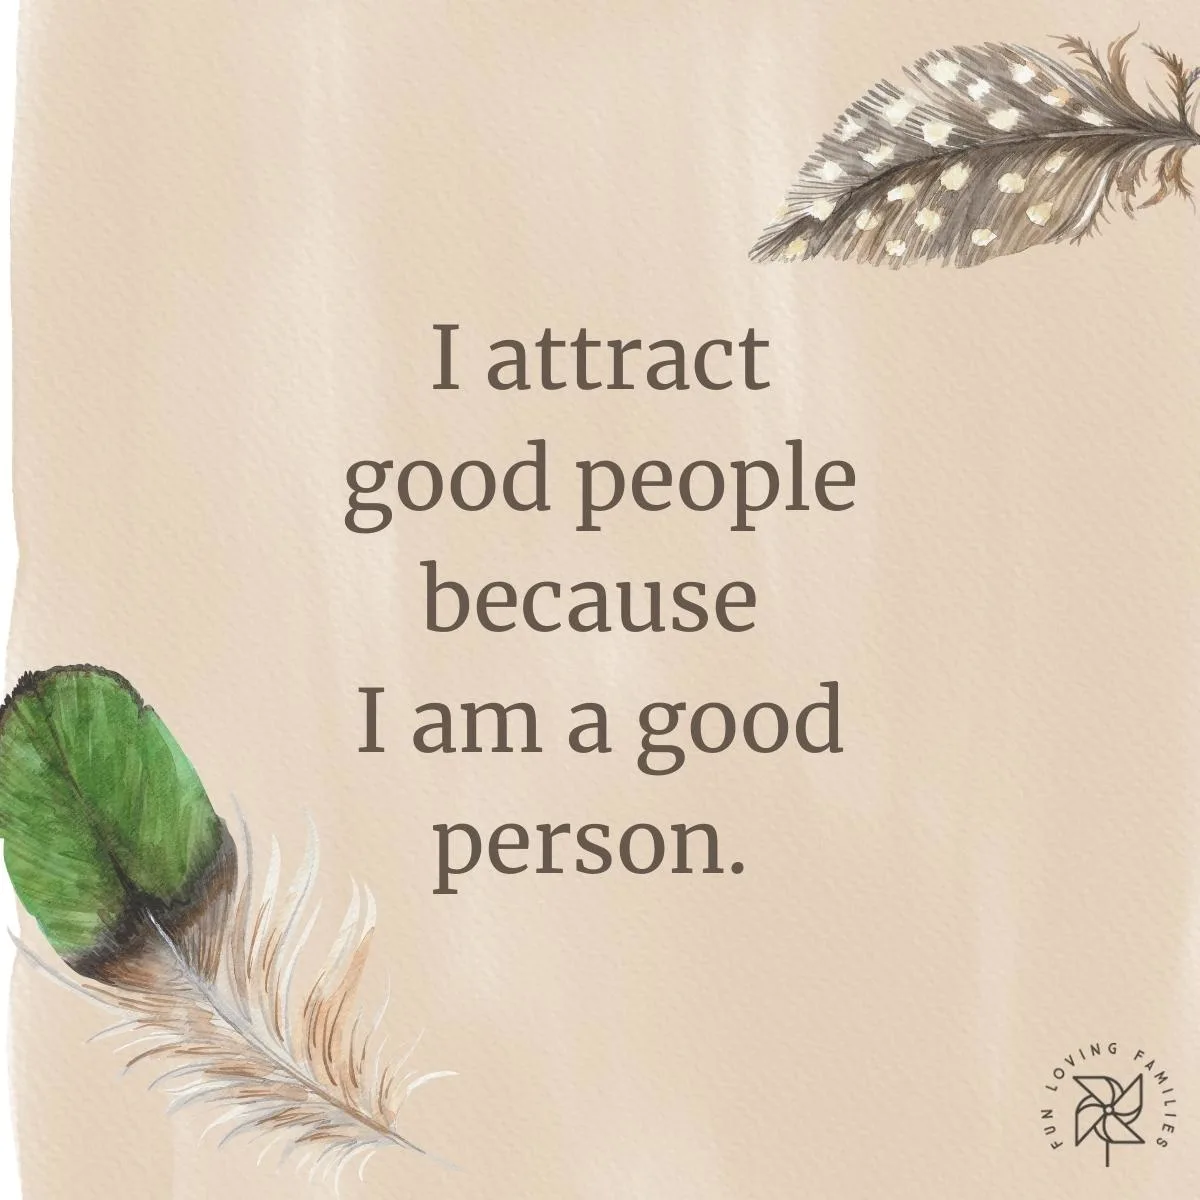 I attract good people because I am a good person affirmation